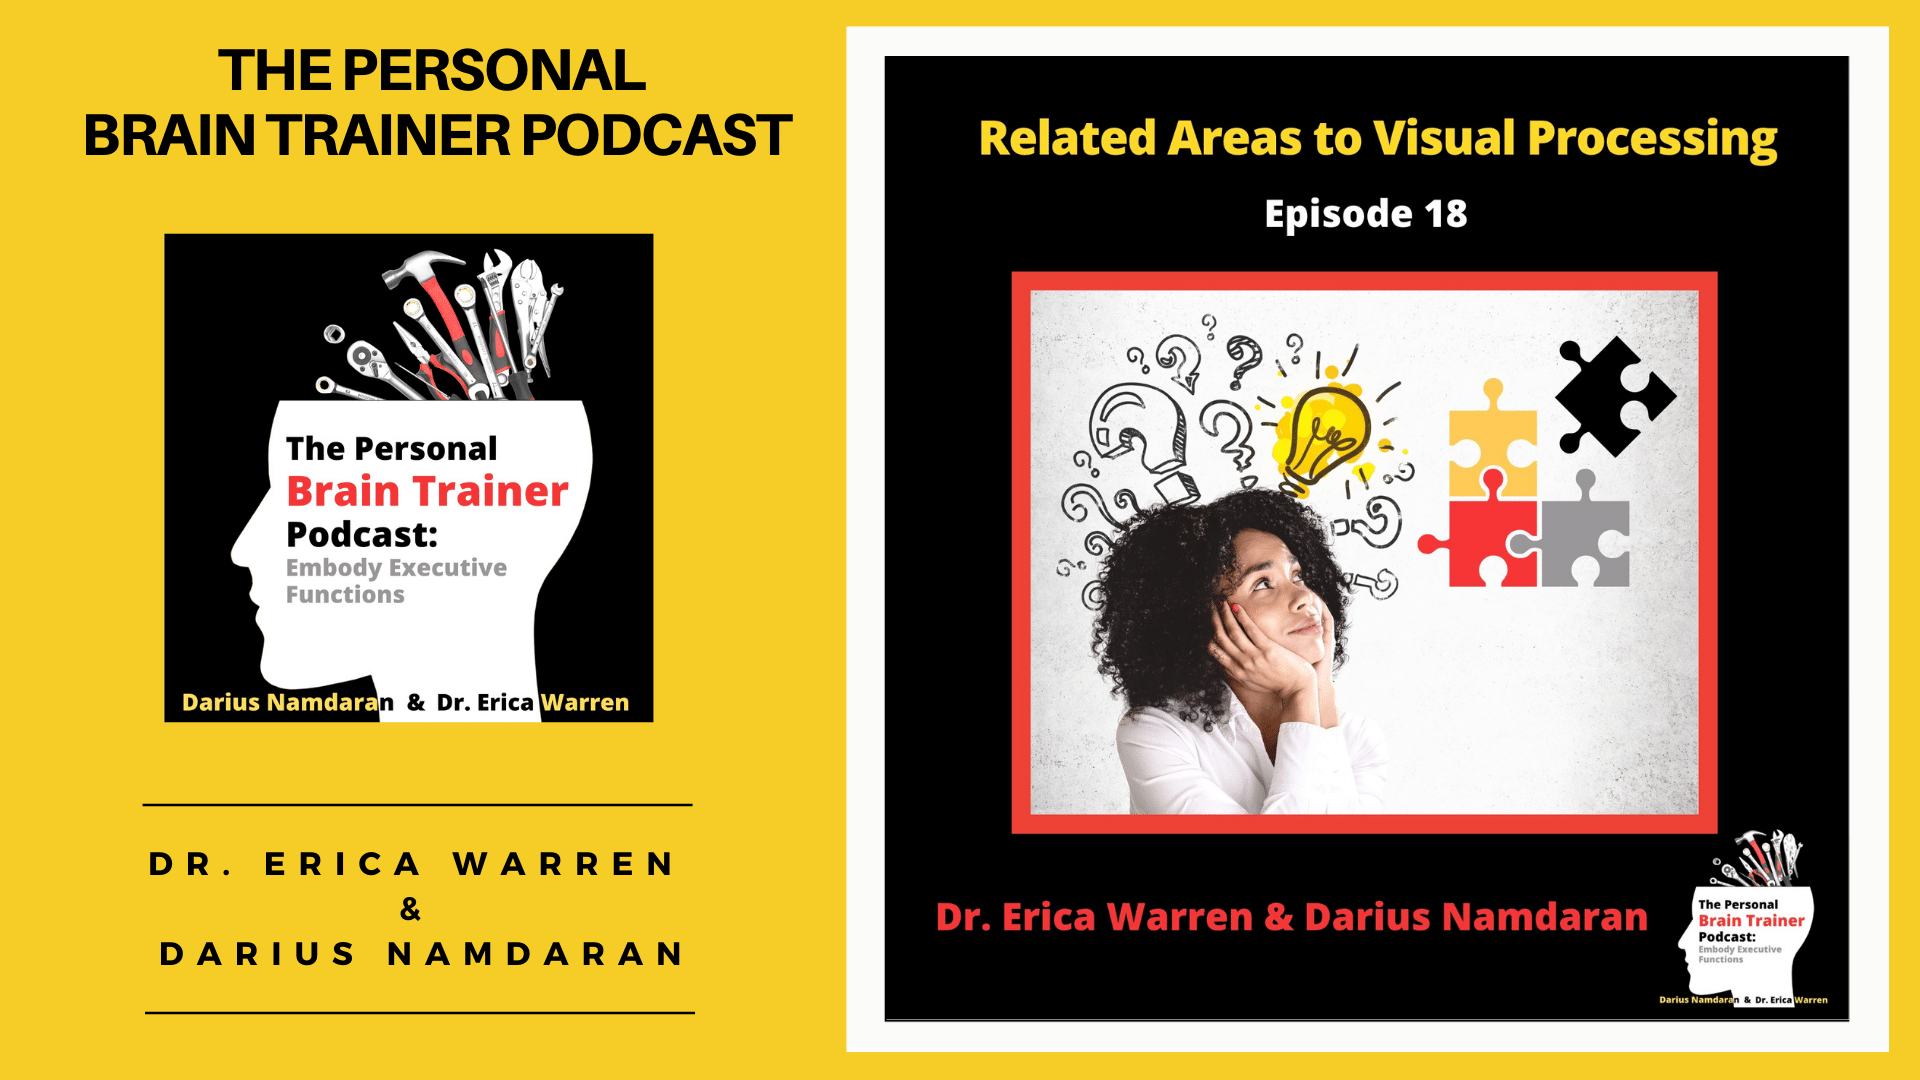 Episode 18 of Personal Brain Trainer podcast